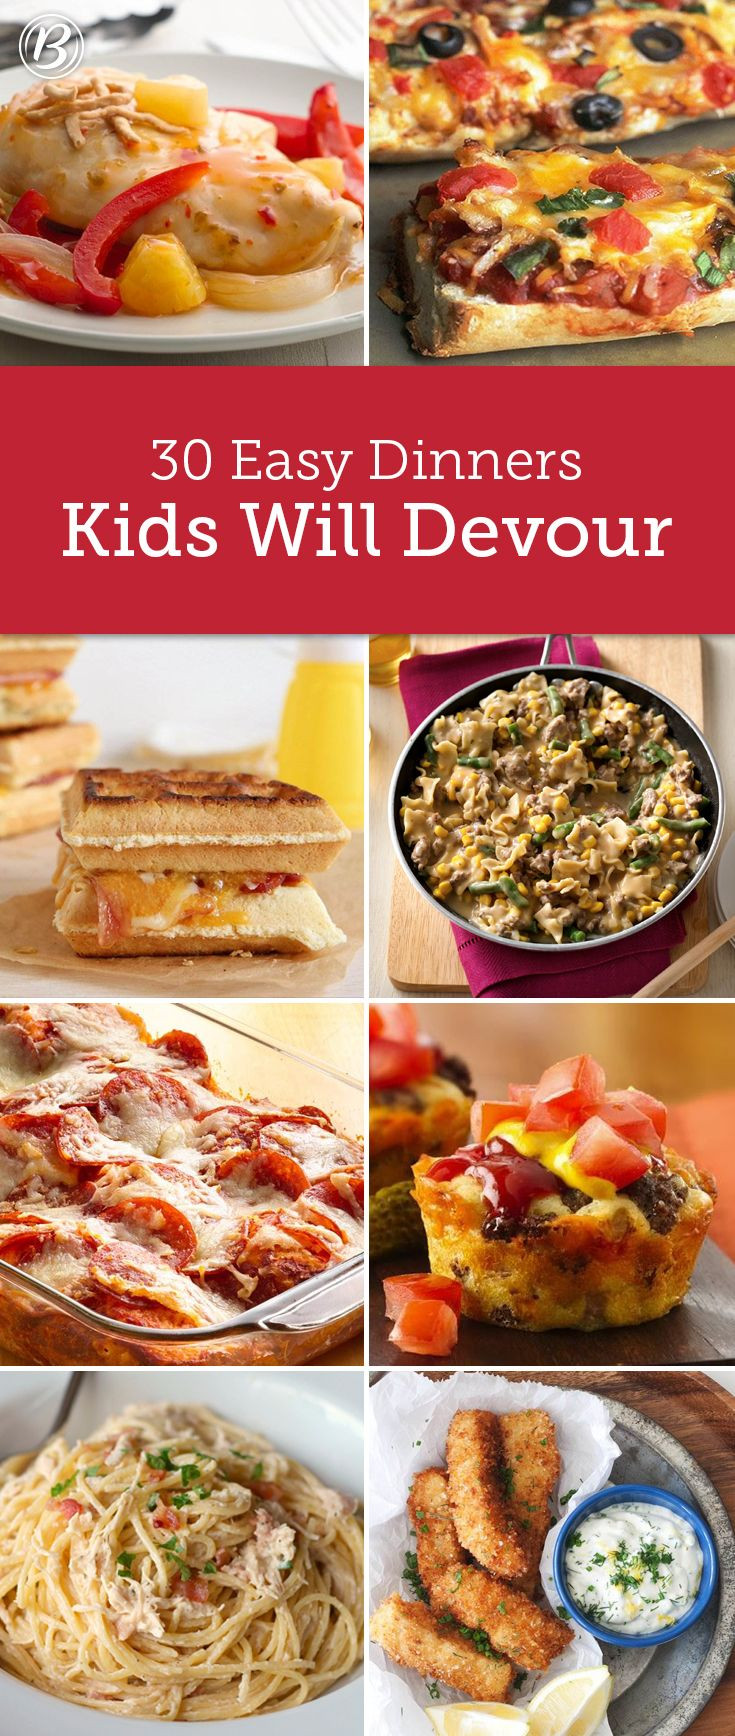 Quick And Easy Kid Friendly Dinners
 Kids’ Most Requested Dinners